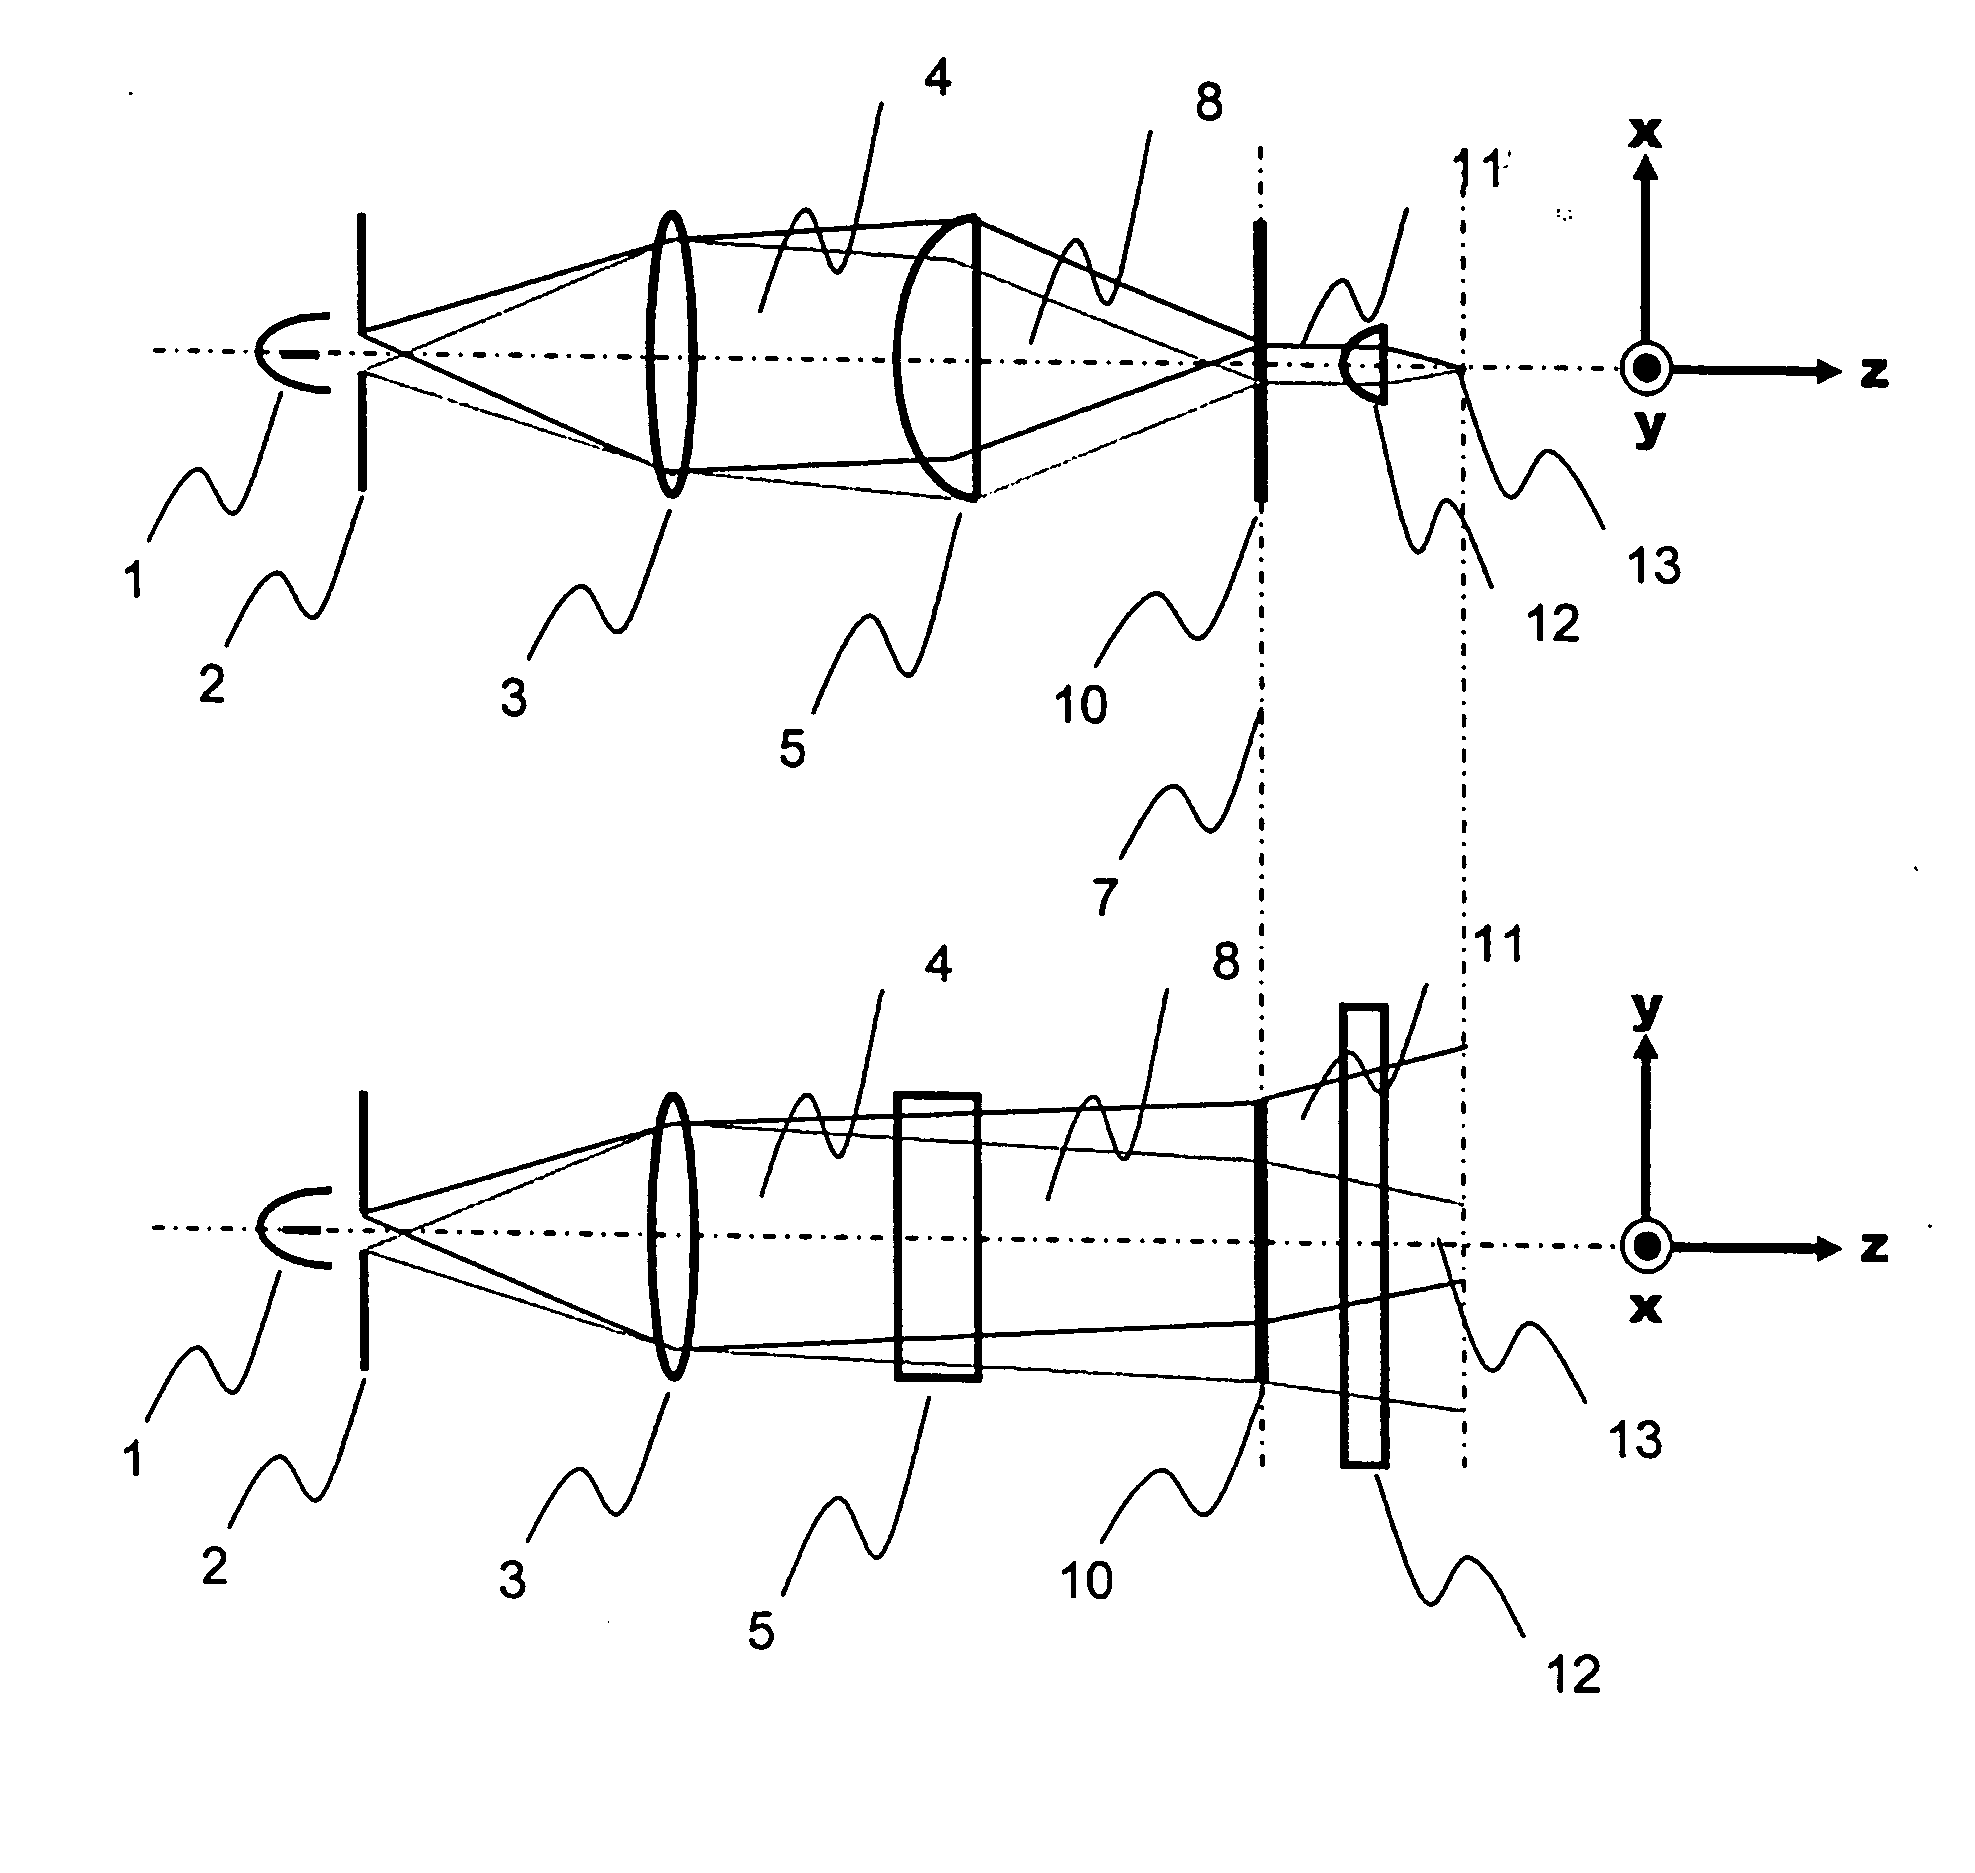 Apparatus and methods relating to concentration and shaping of illumination